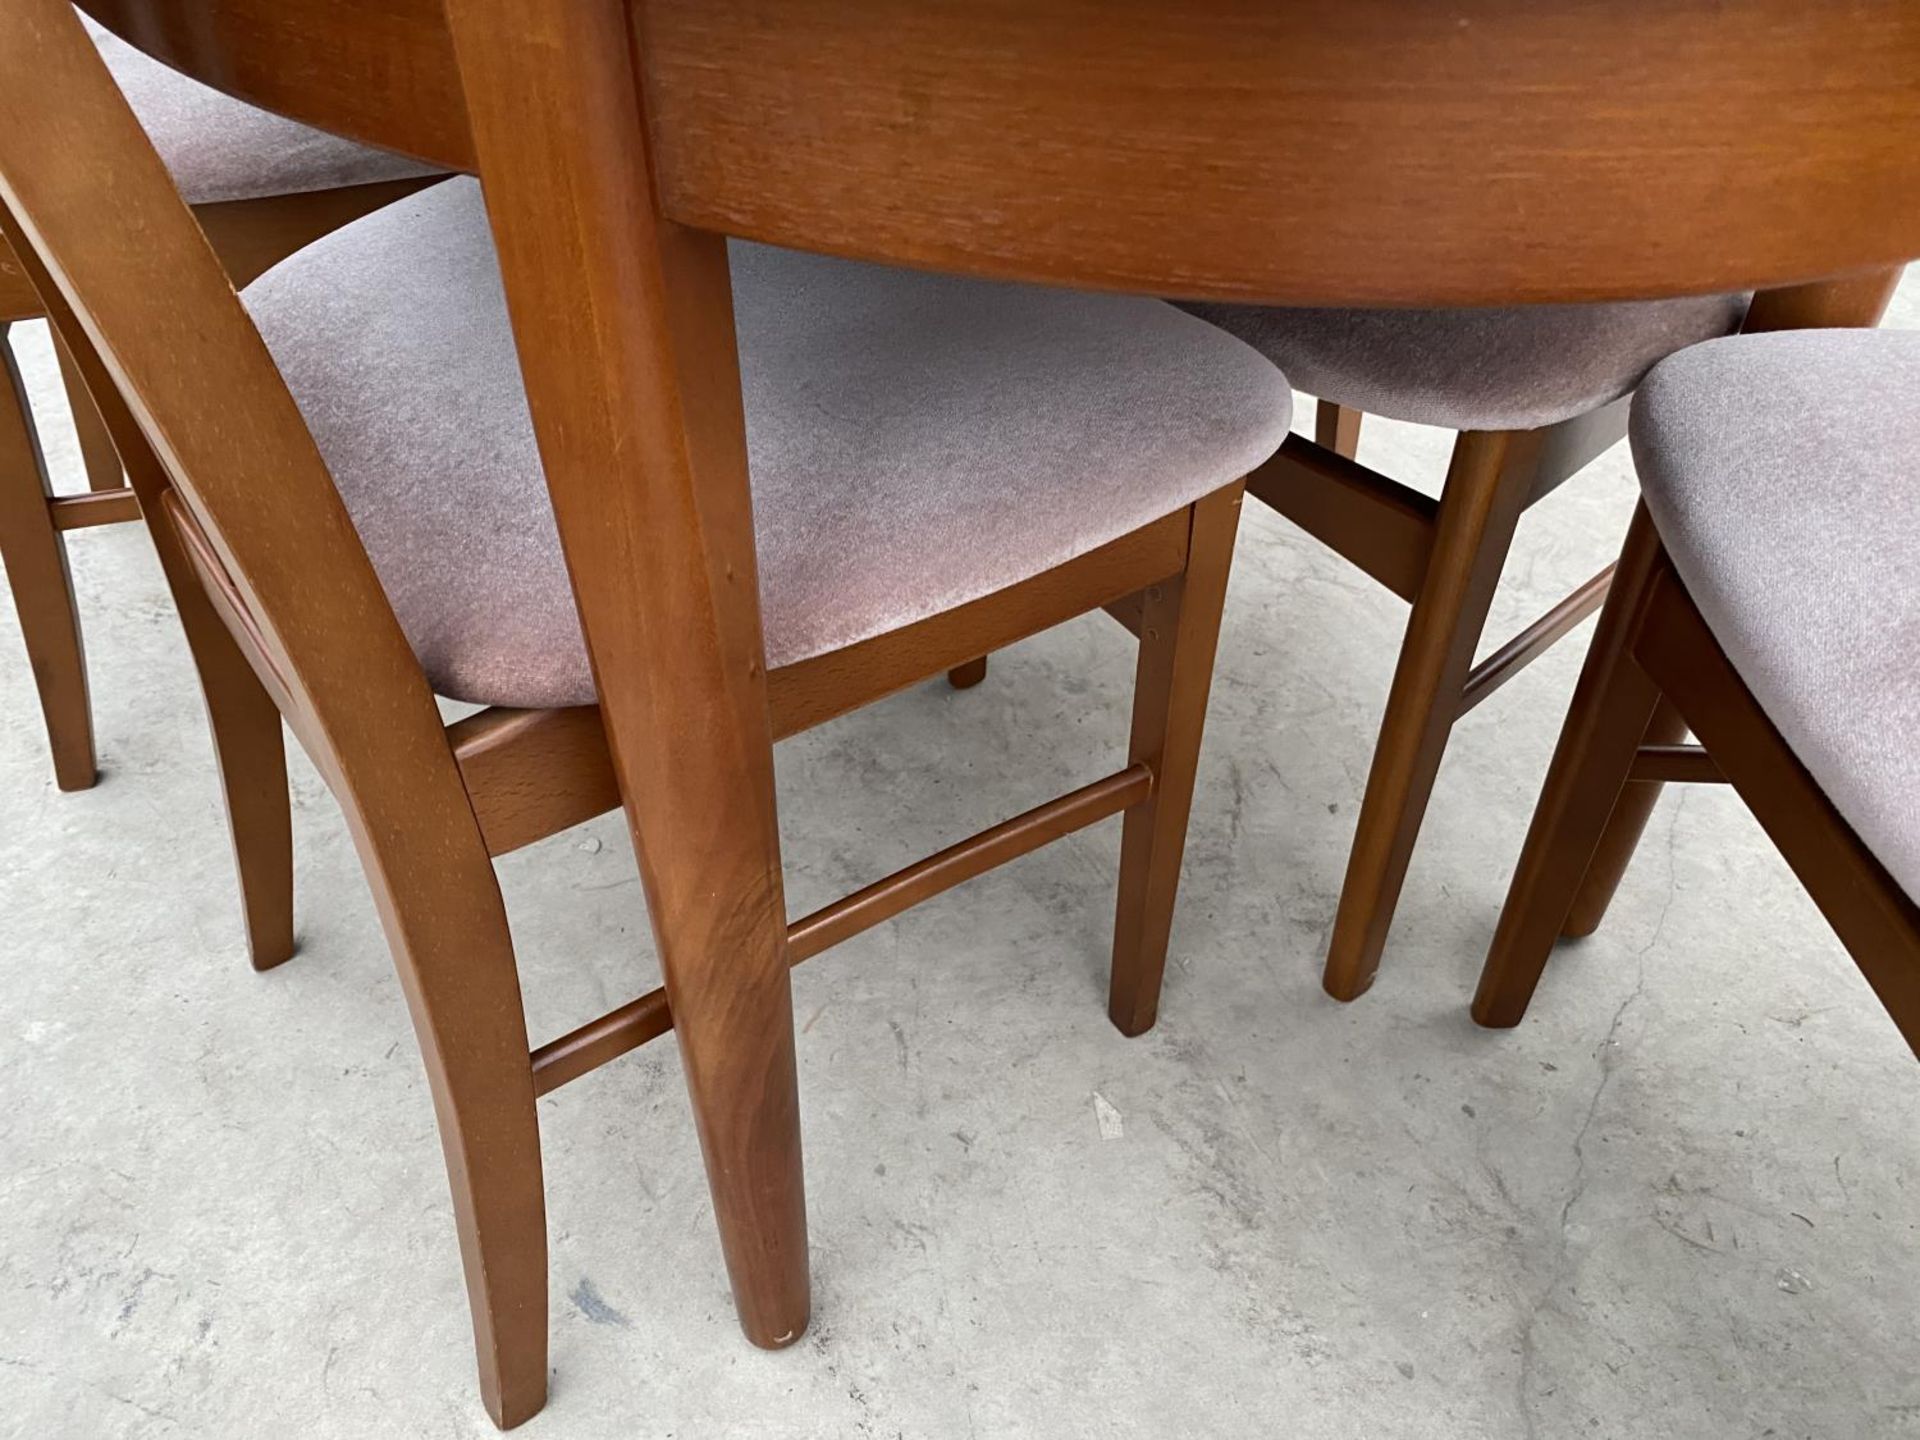 A RETRO EXTENDING TEAK DINING TABLE AND SIX TEAK DINING CHAIRS - Image 3 of 6